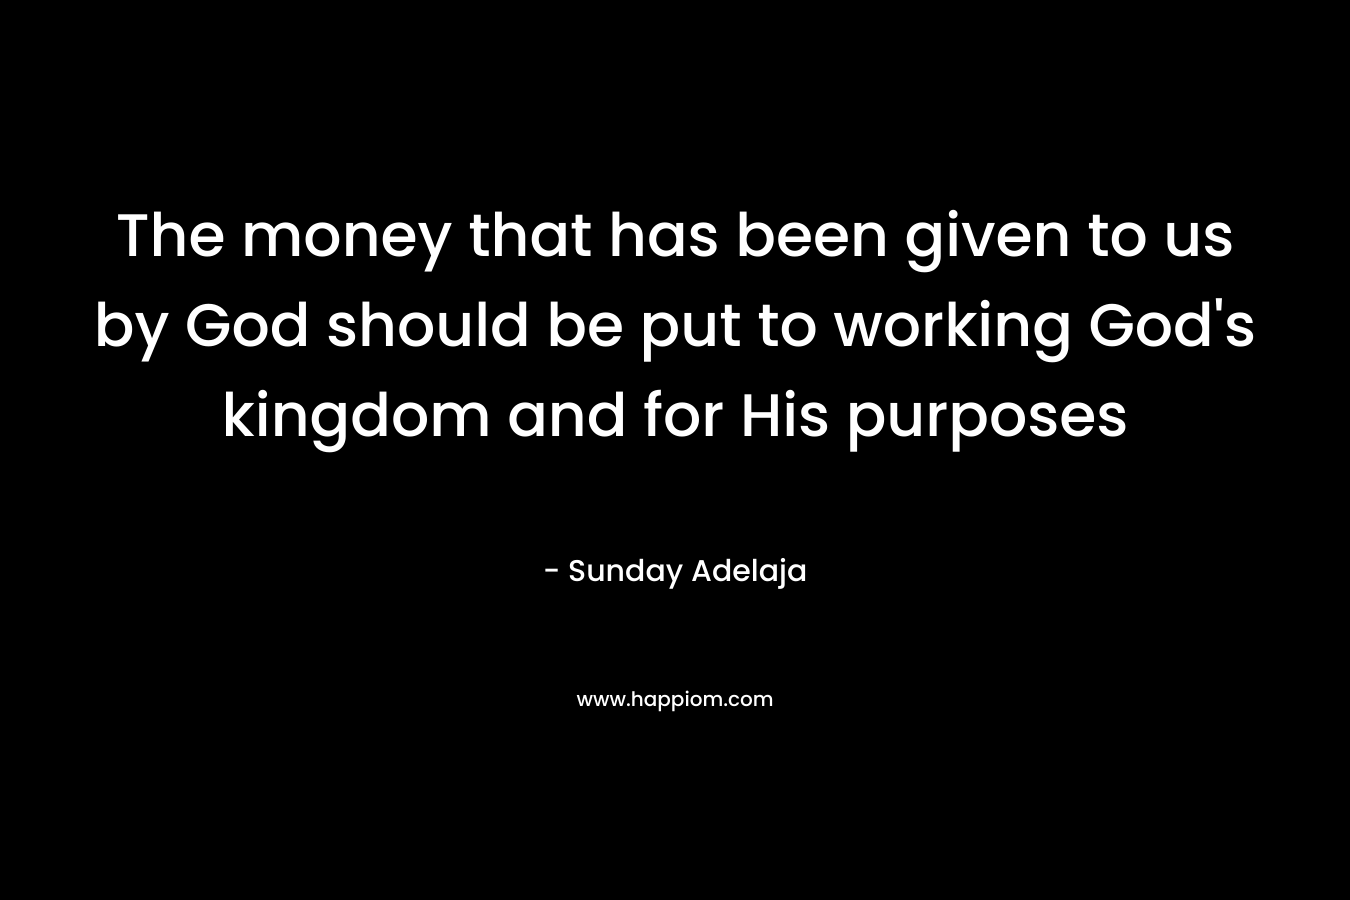 The money that has been given to us by God should be put to working God's kingdom and for His purposes